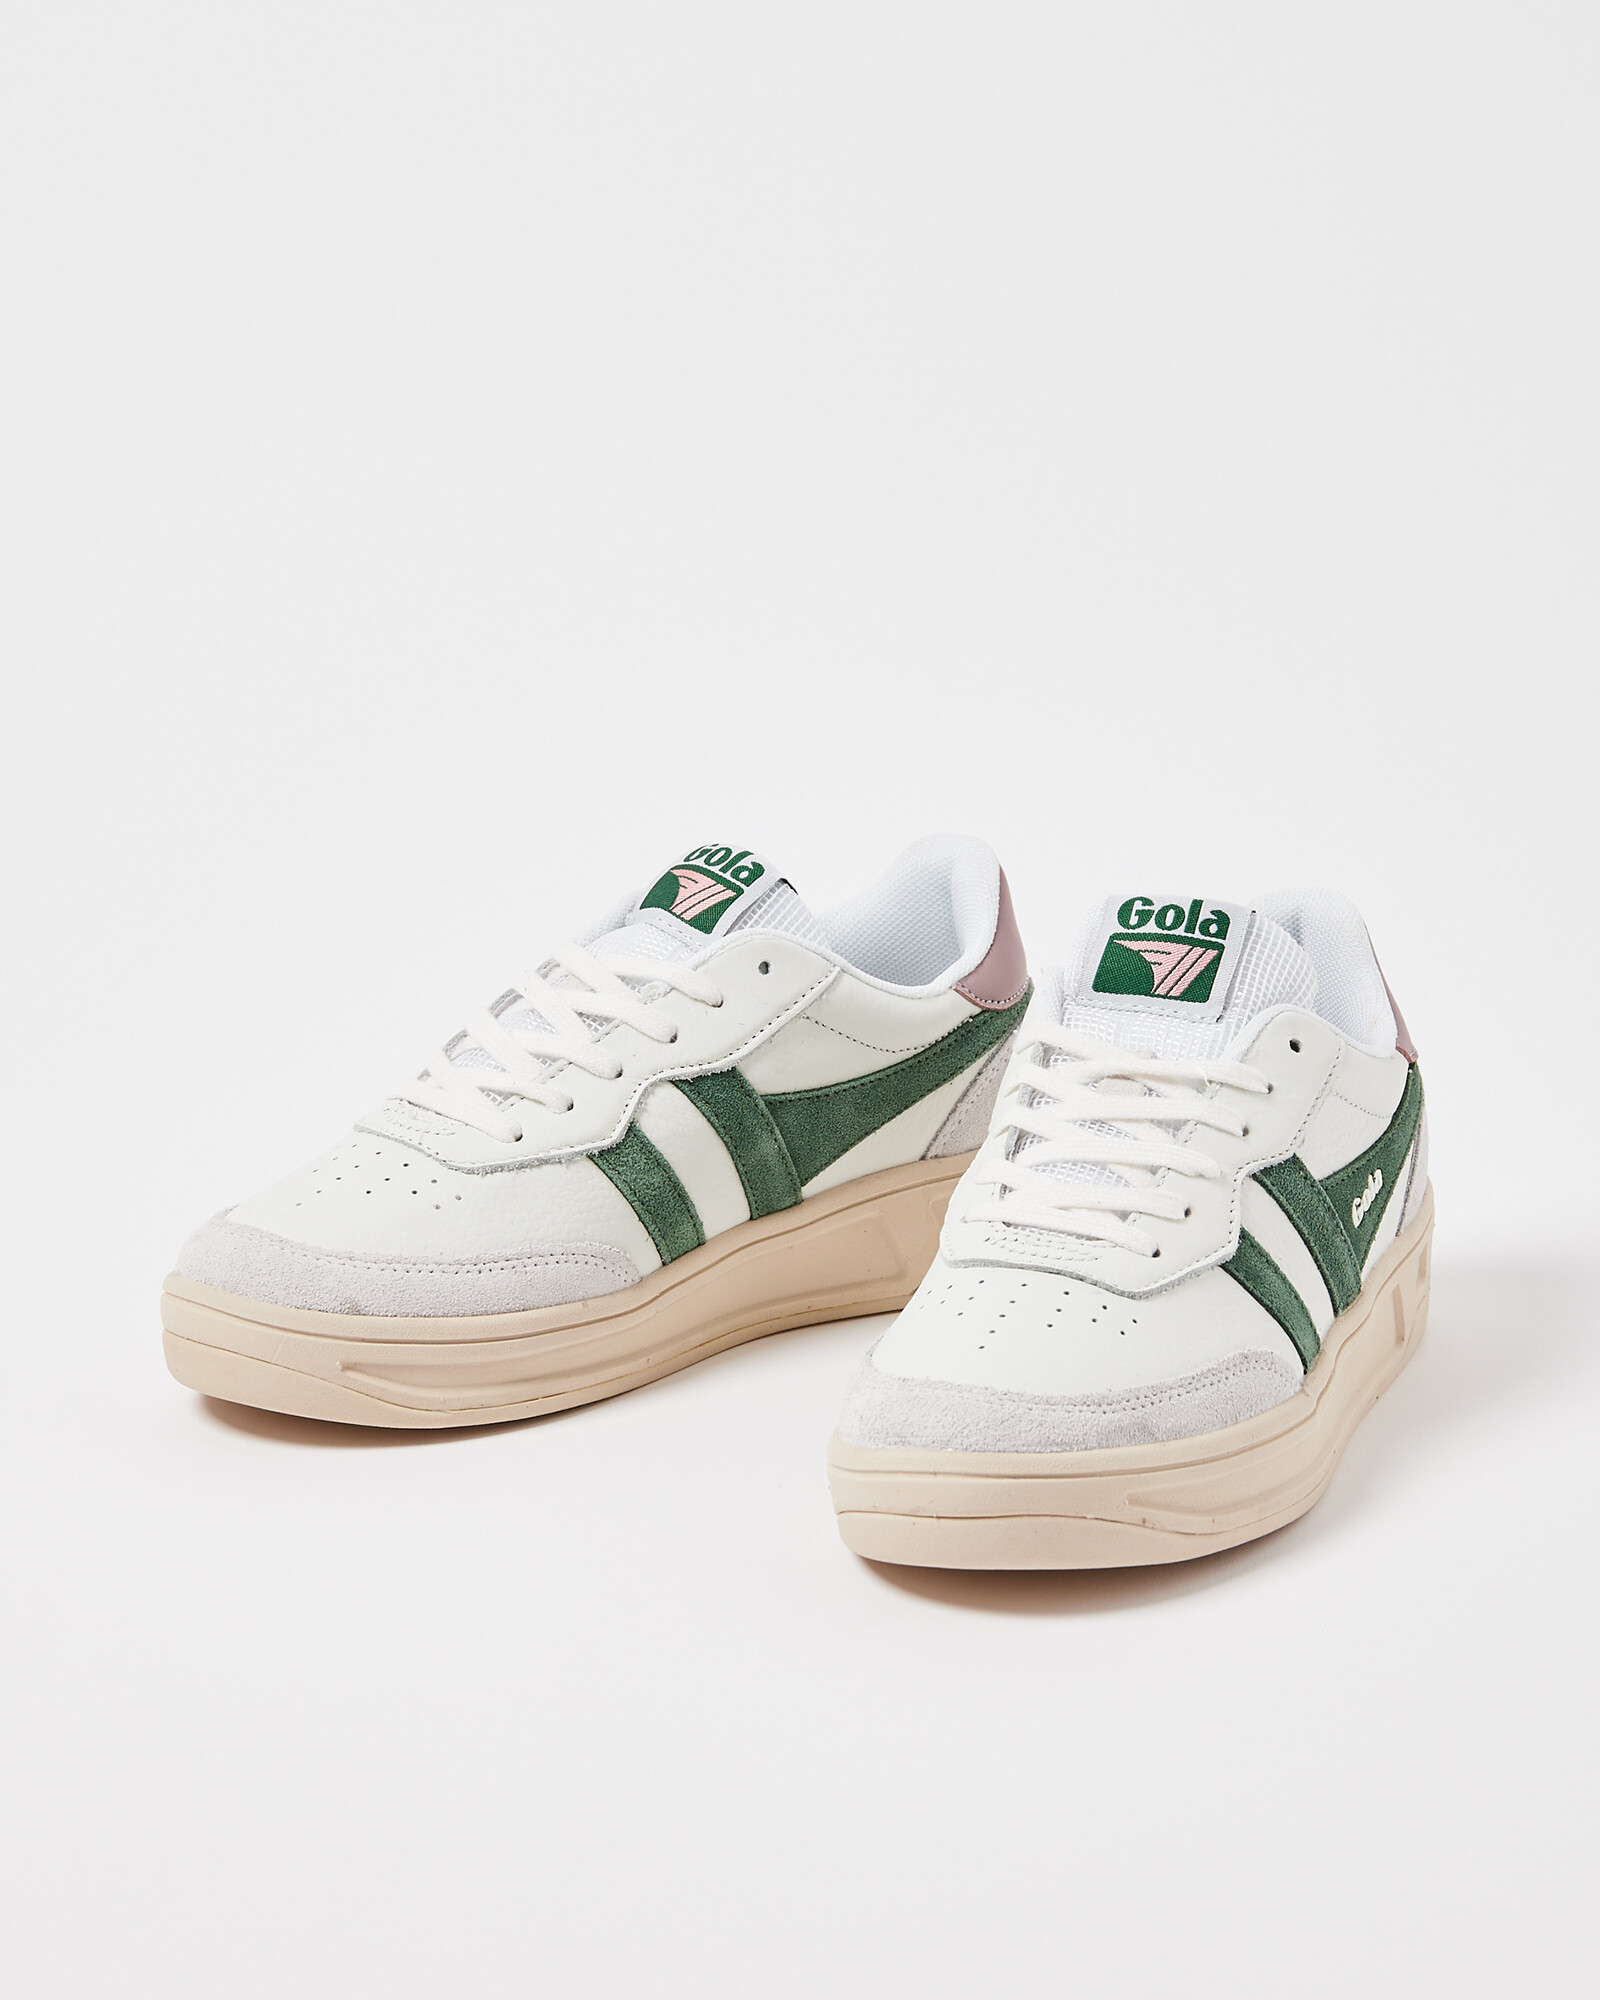 Gola Topspin Green Suede Leather Trainers | Oliver Bonas